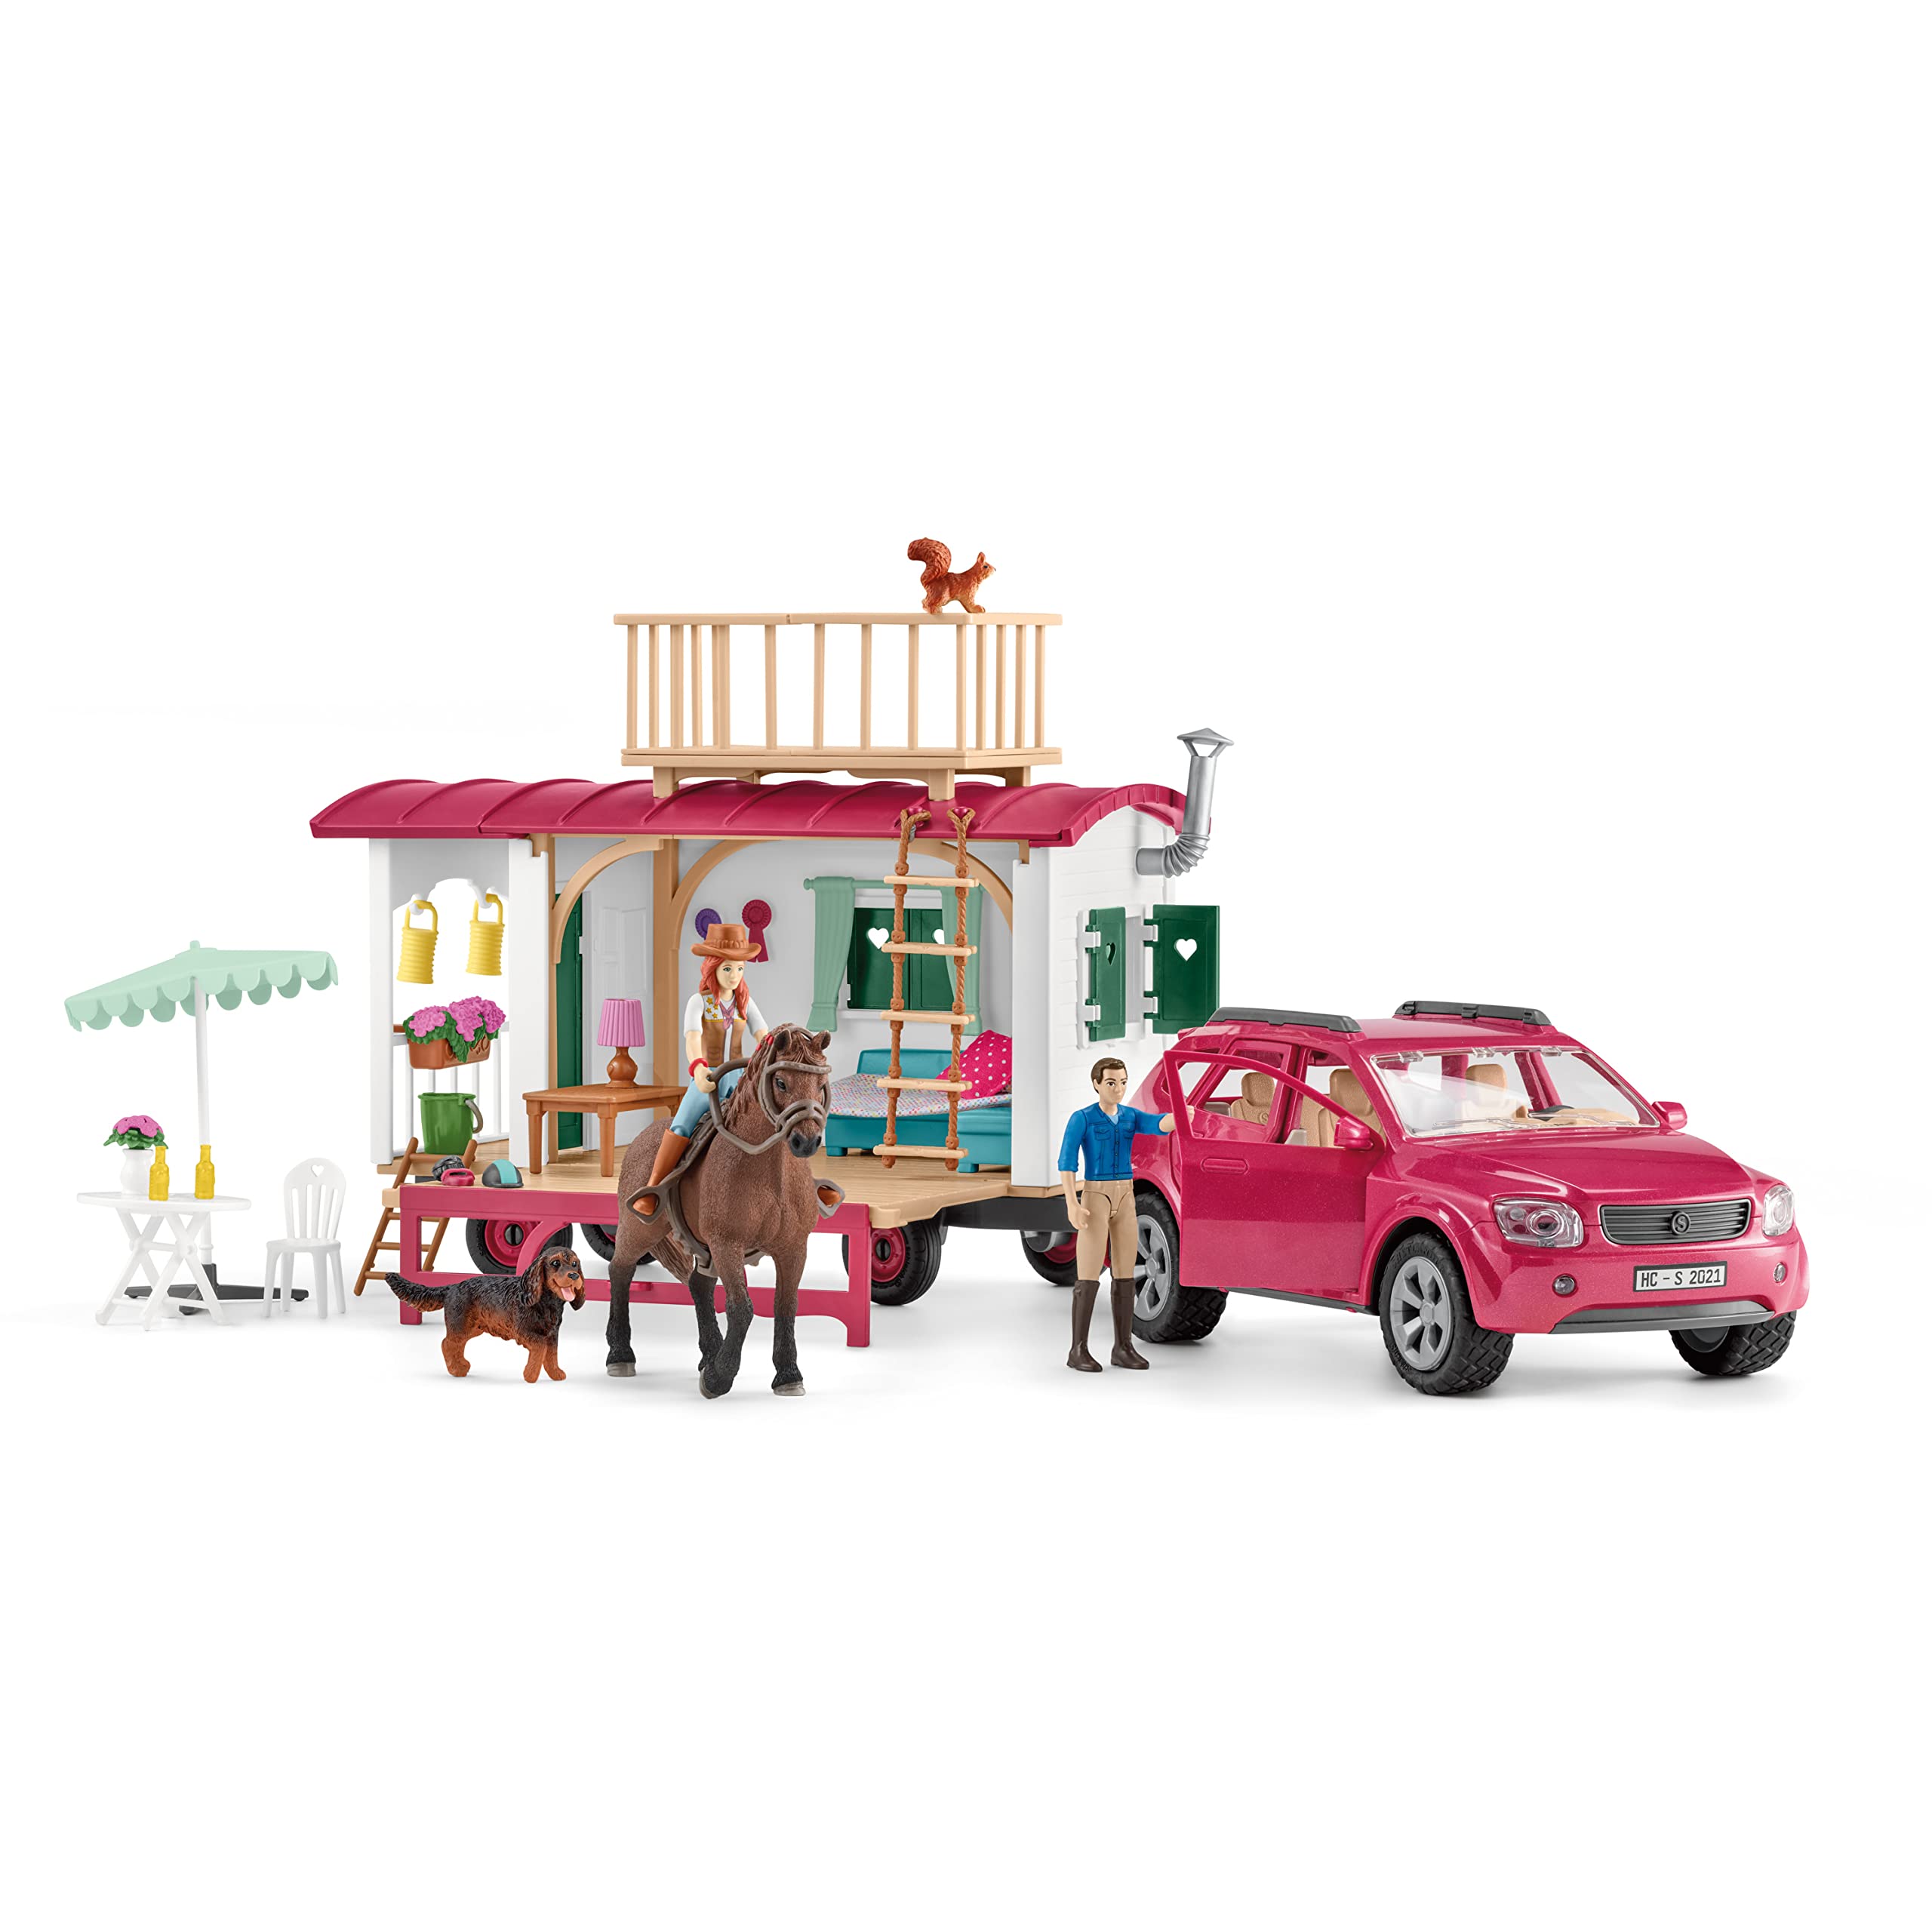 Schleich Horse Club, Horse Toys for Girls and Boys, Camping Trip with Camper Playset